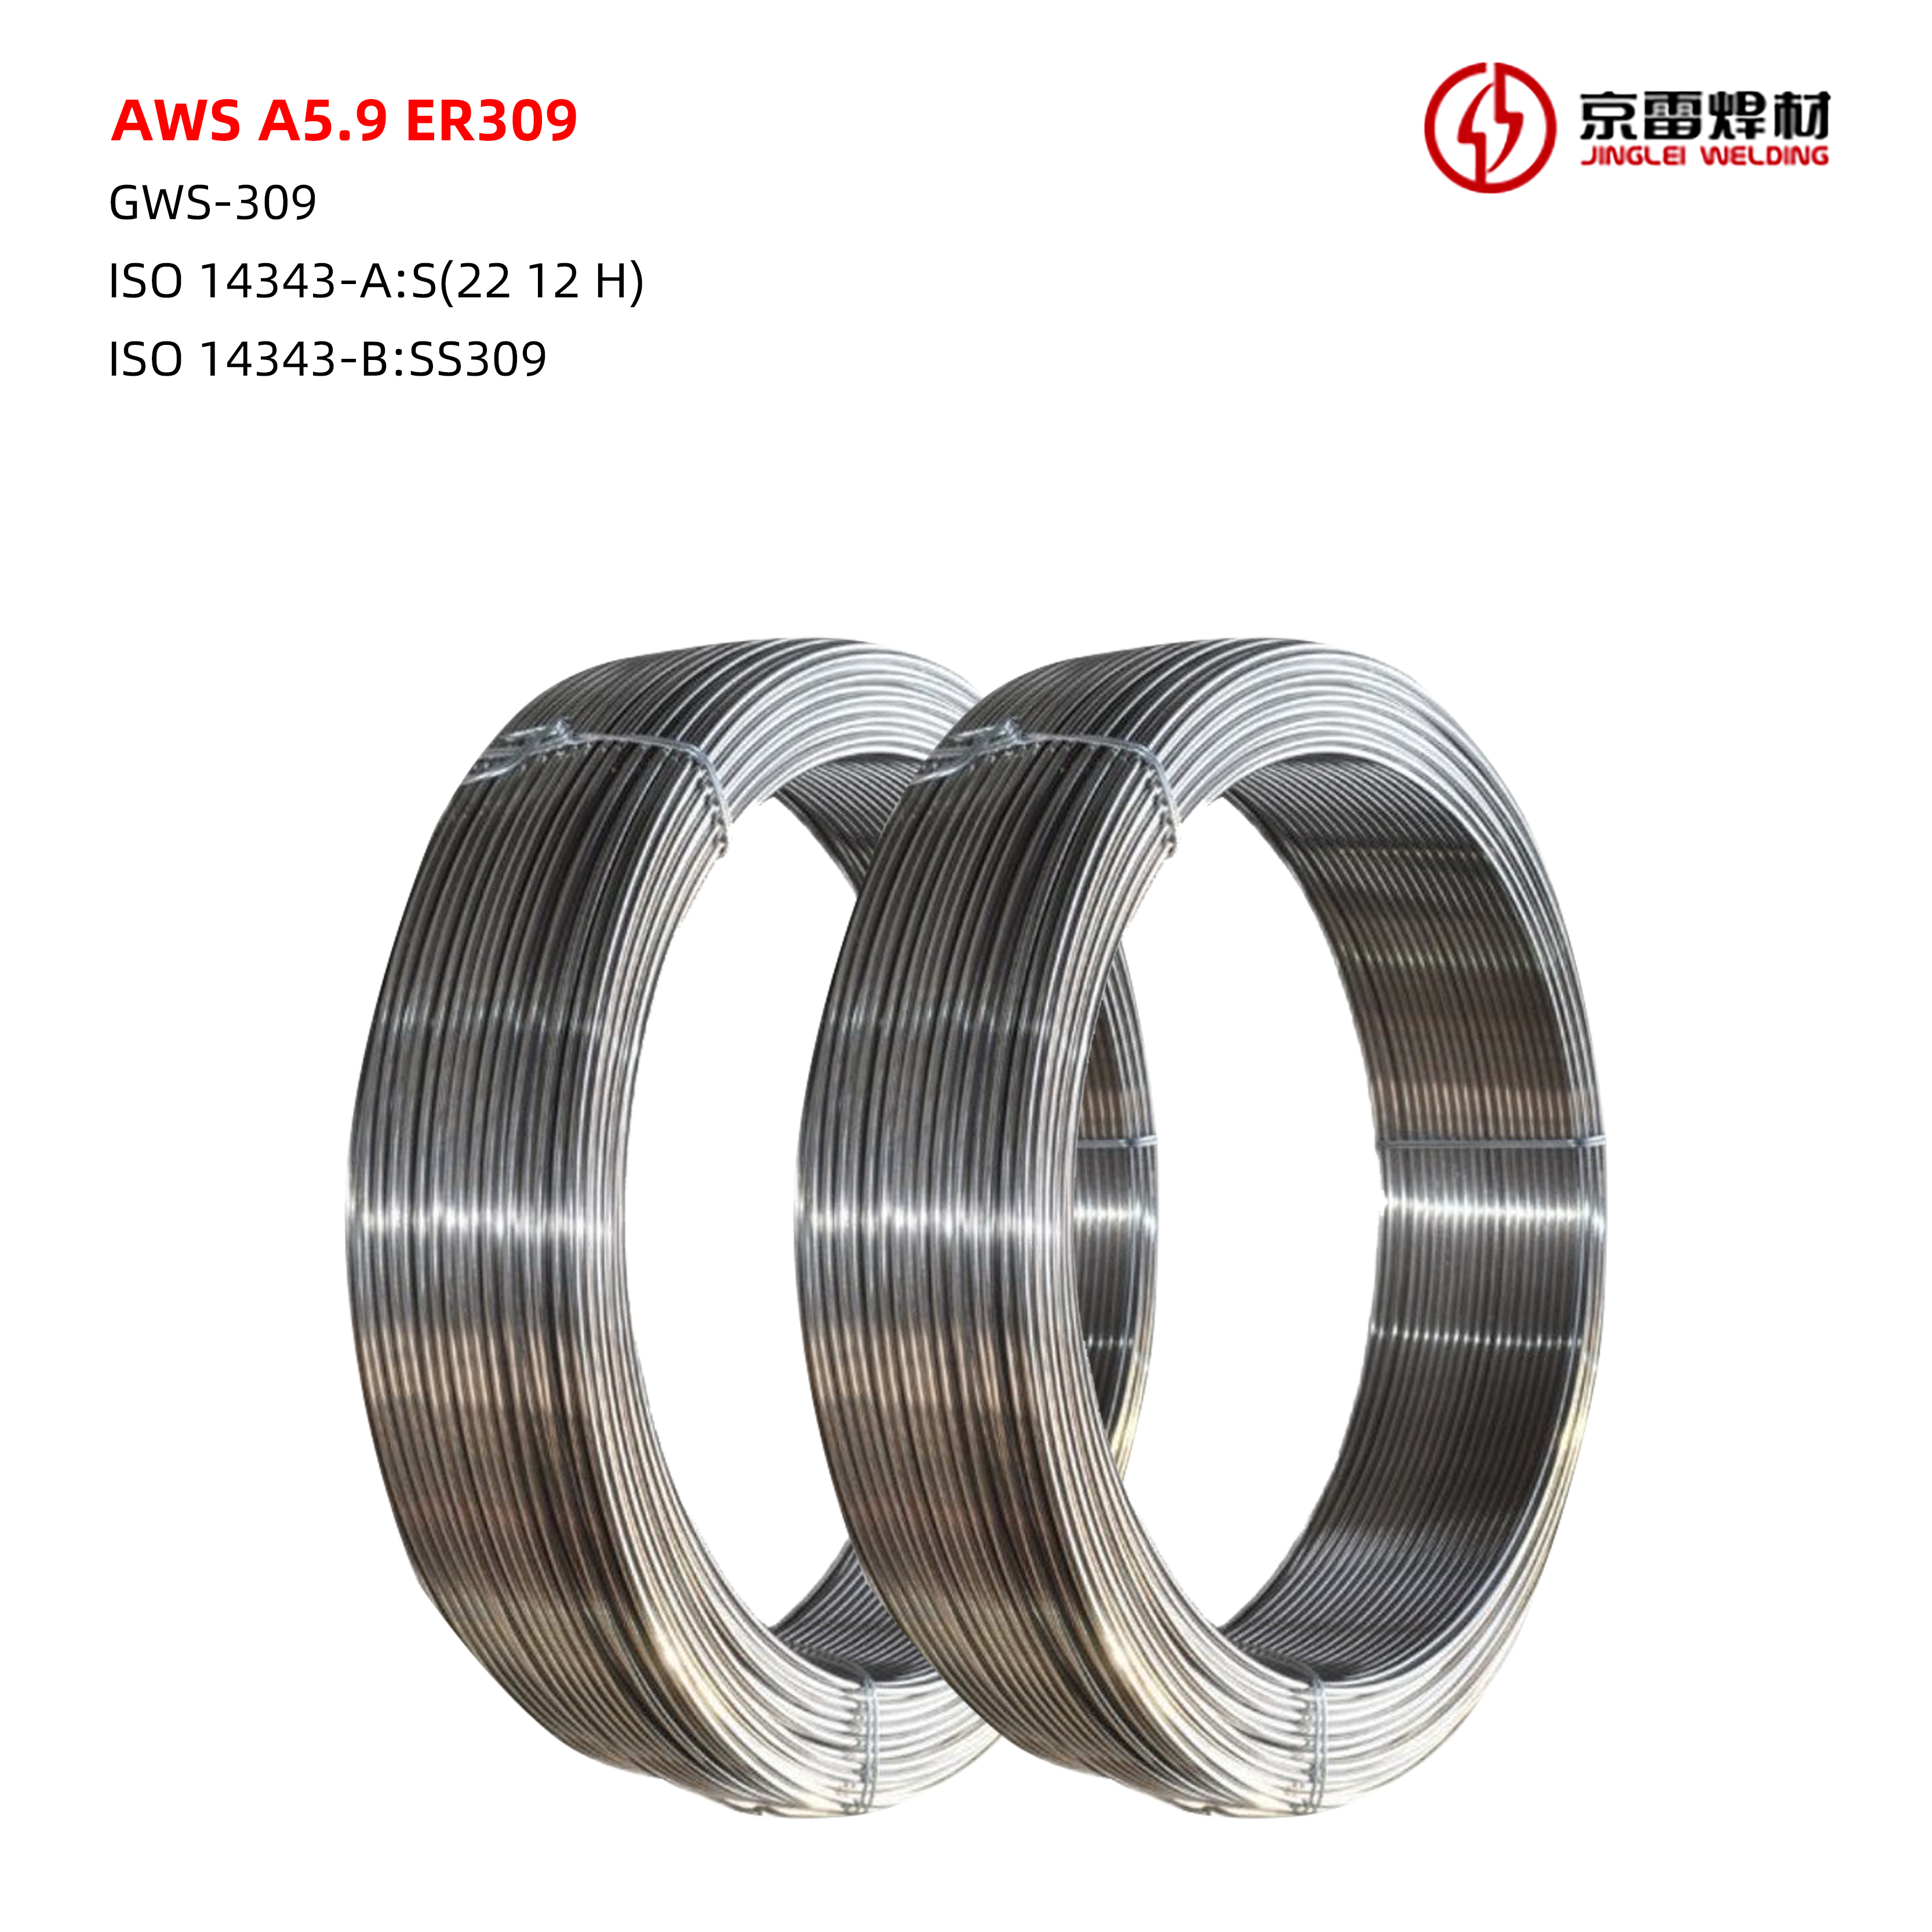 Stainless steels SAW welding wire ER309 and flux Welding data